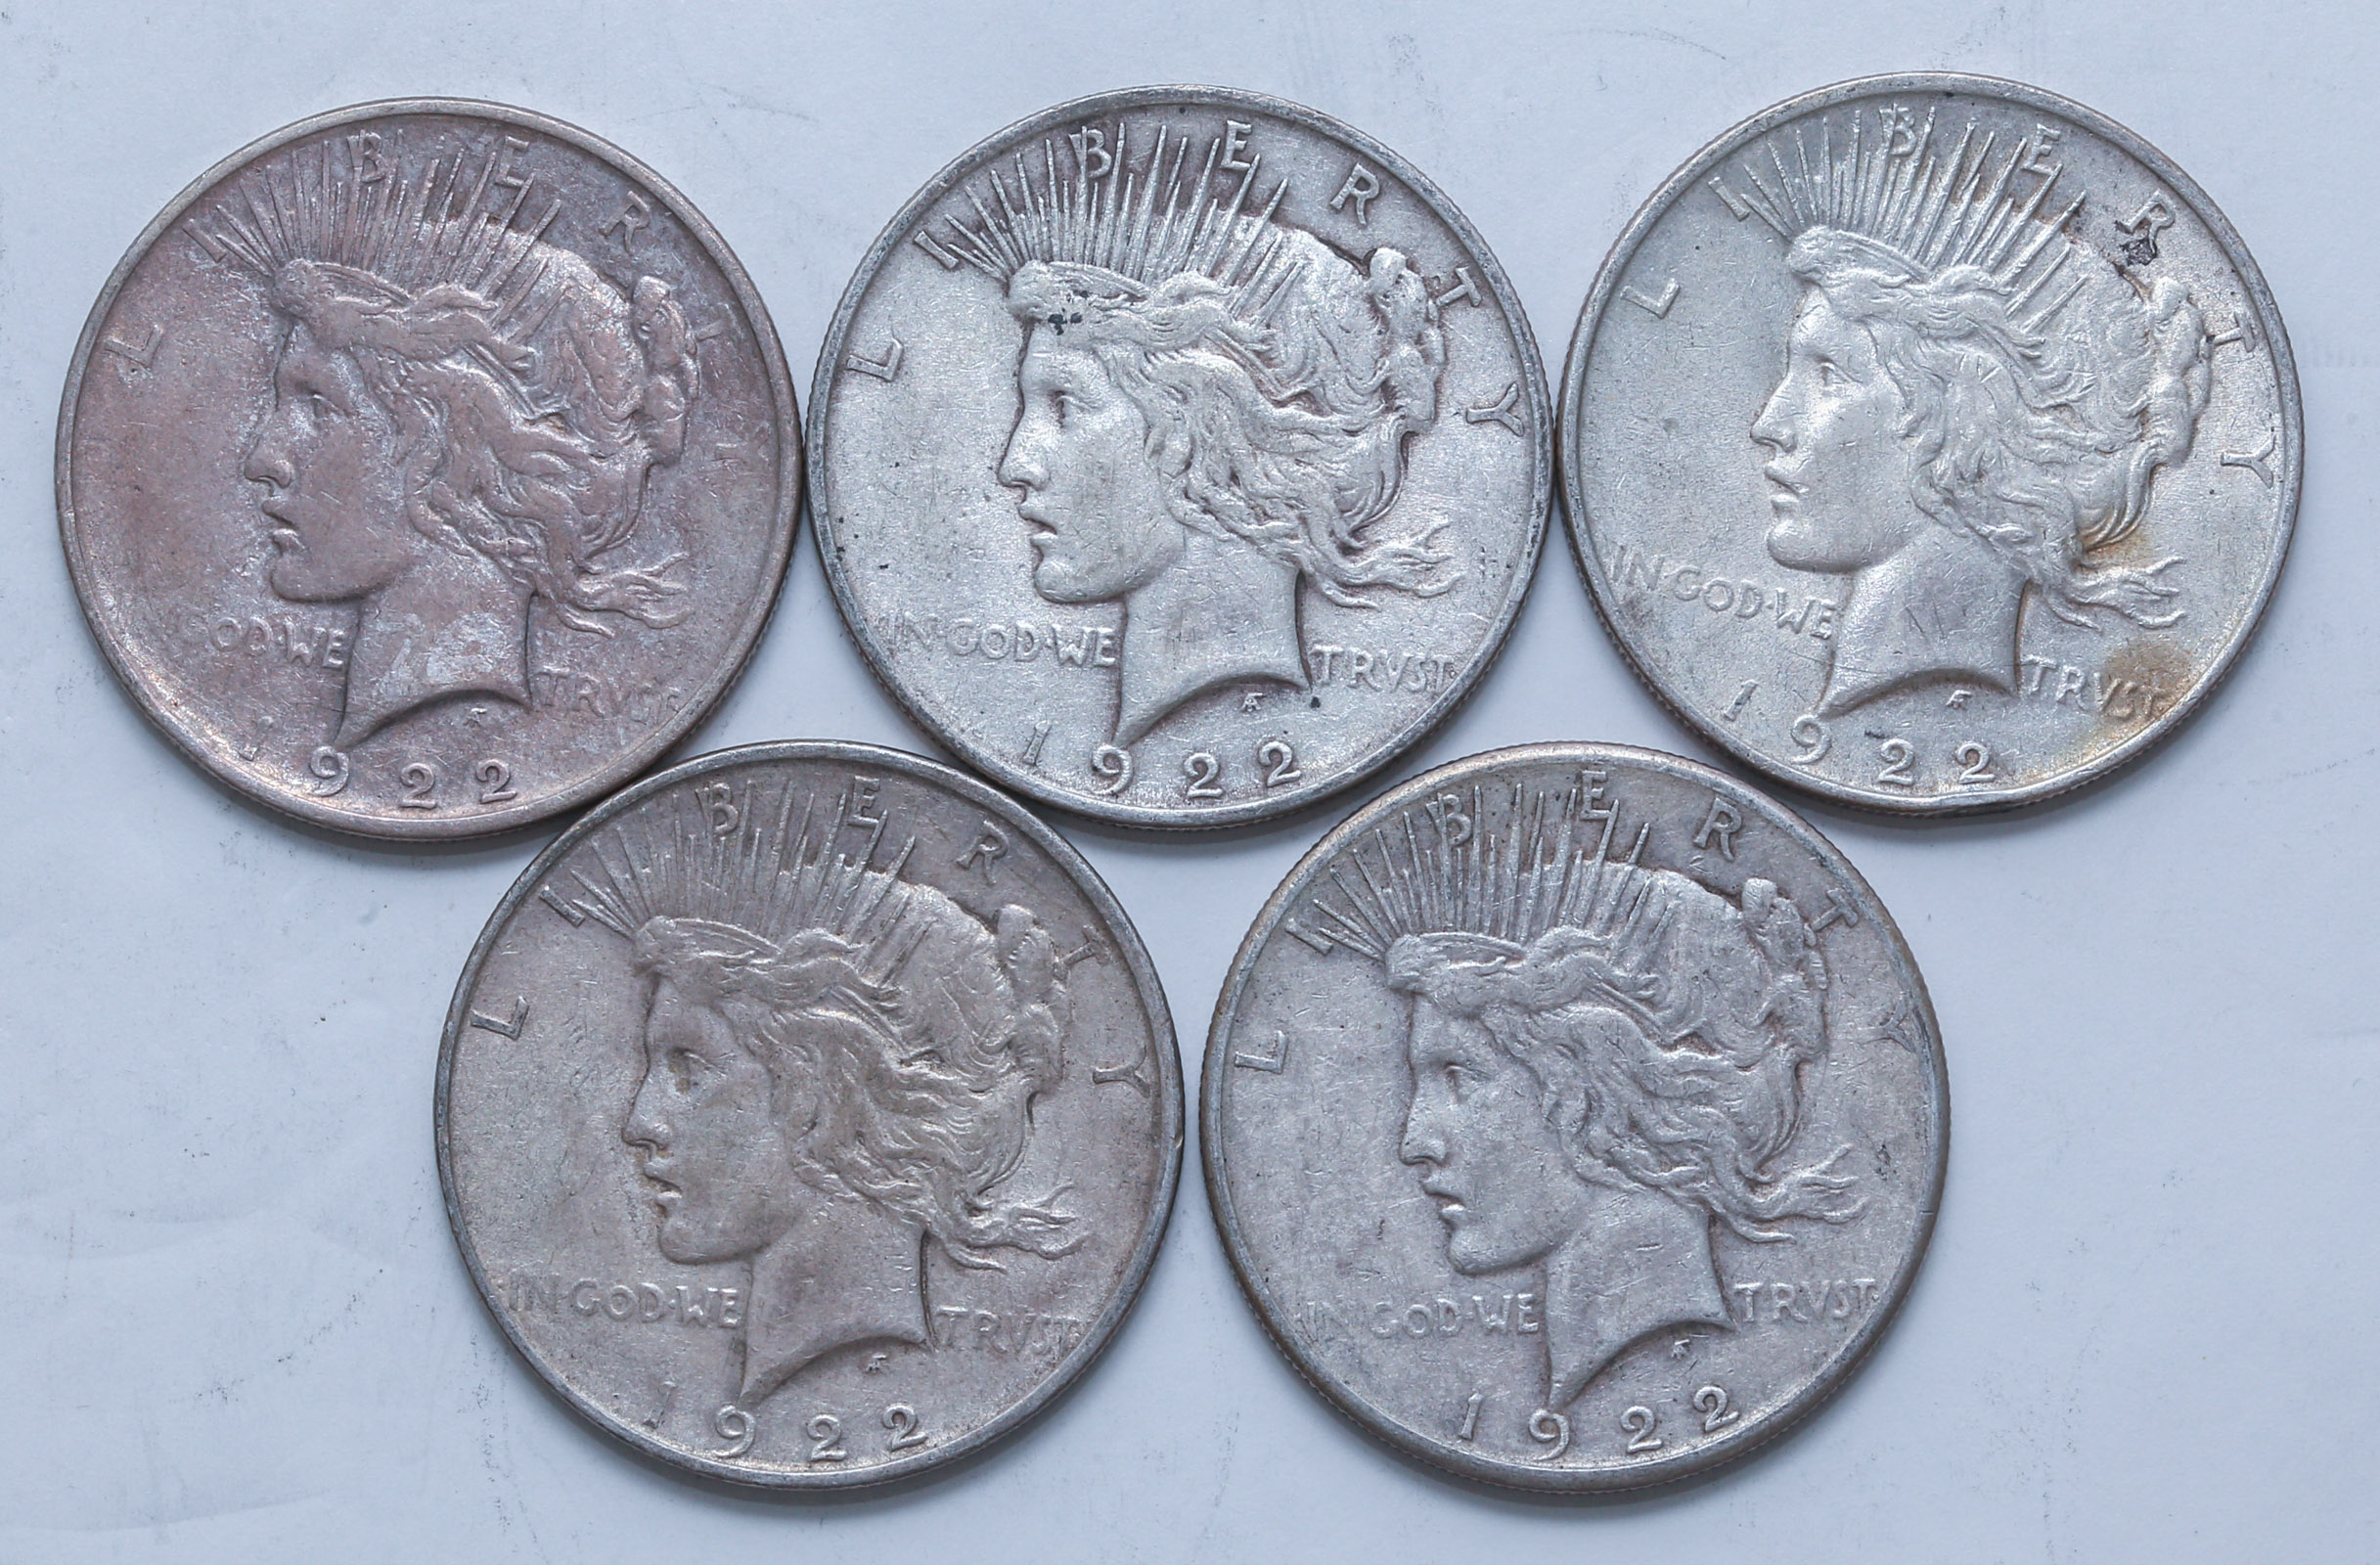 FIVE SILVER PEACE DOLLARS 1922